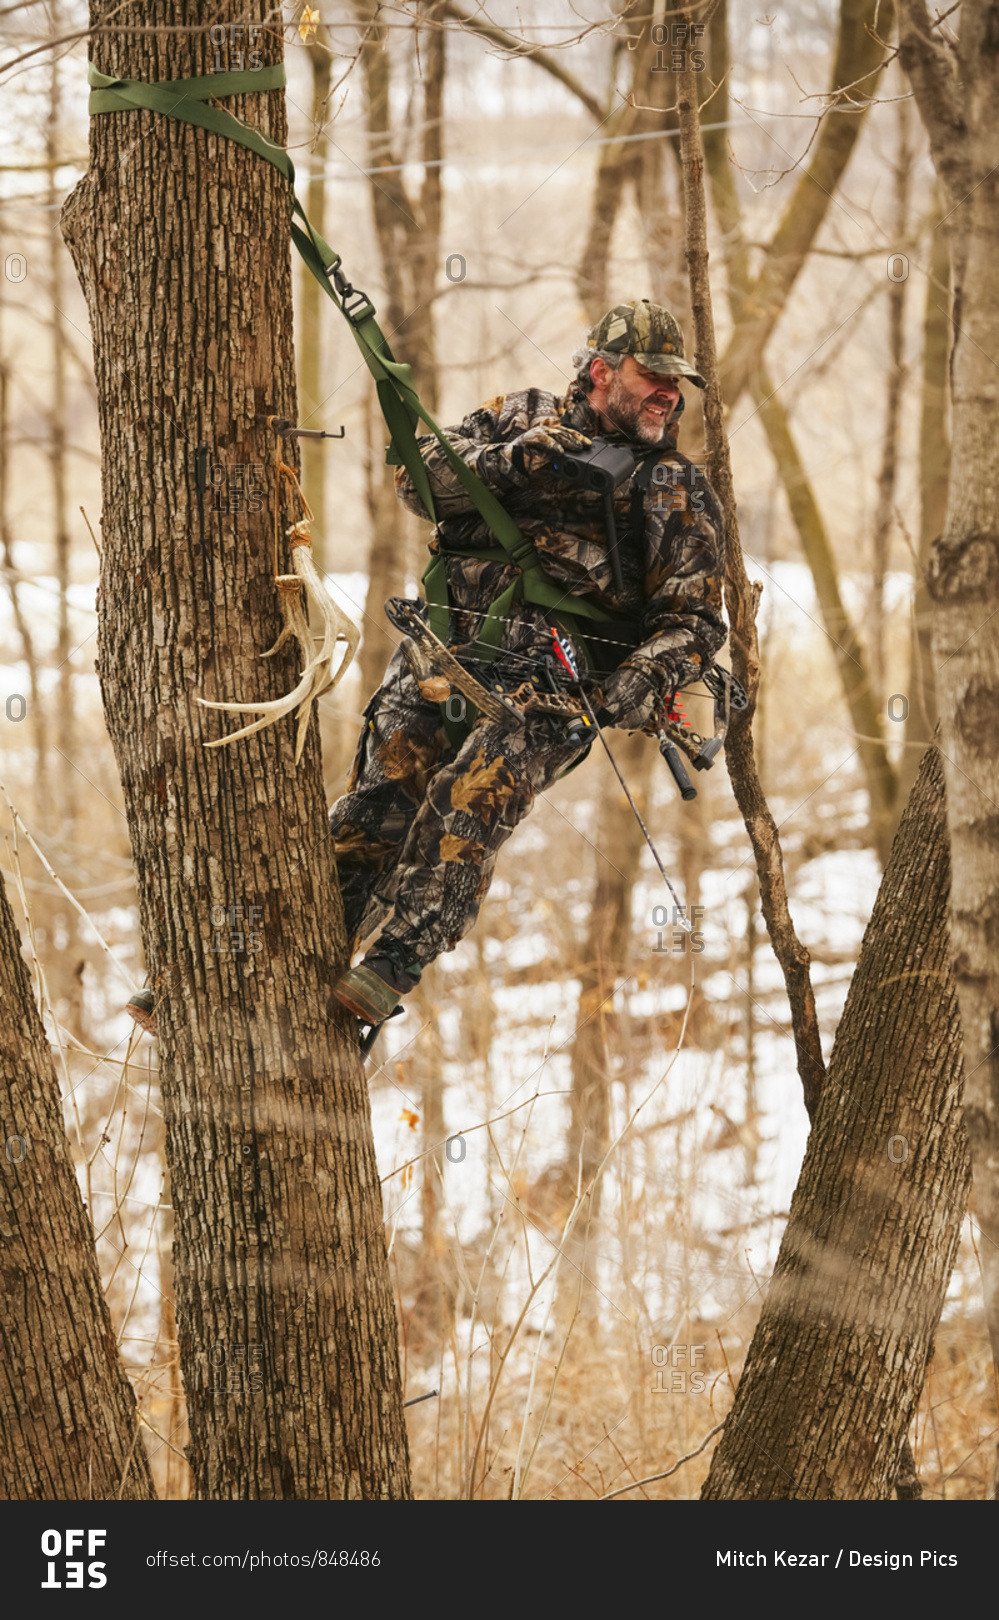 bow hunter in tree stand